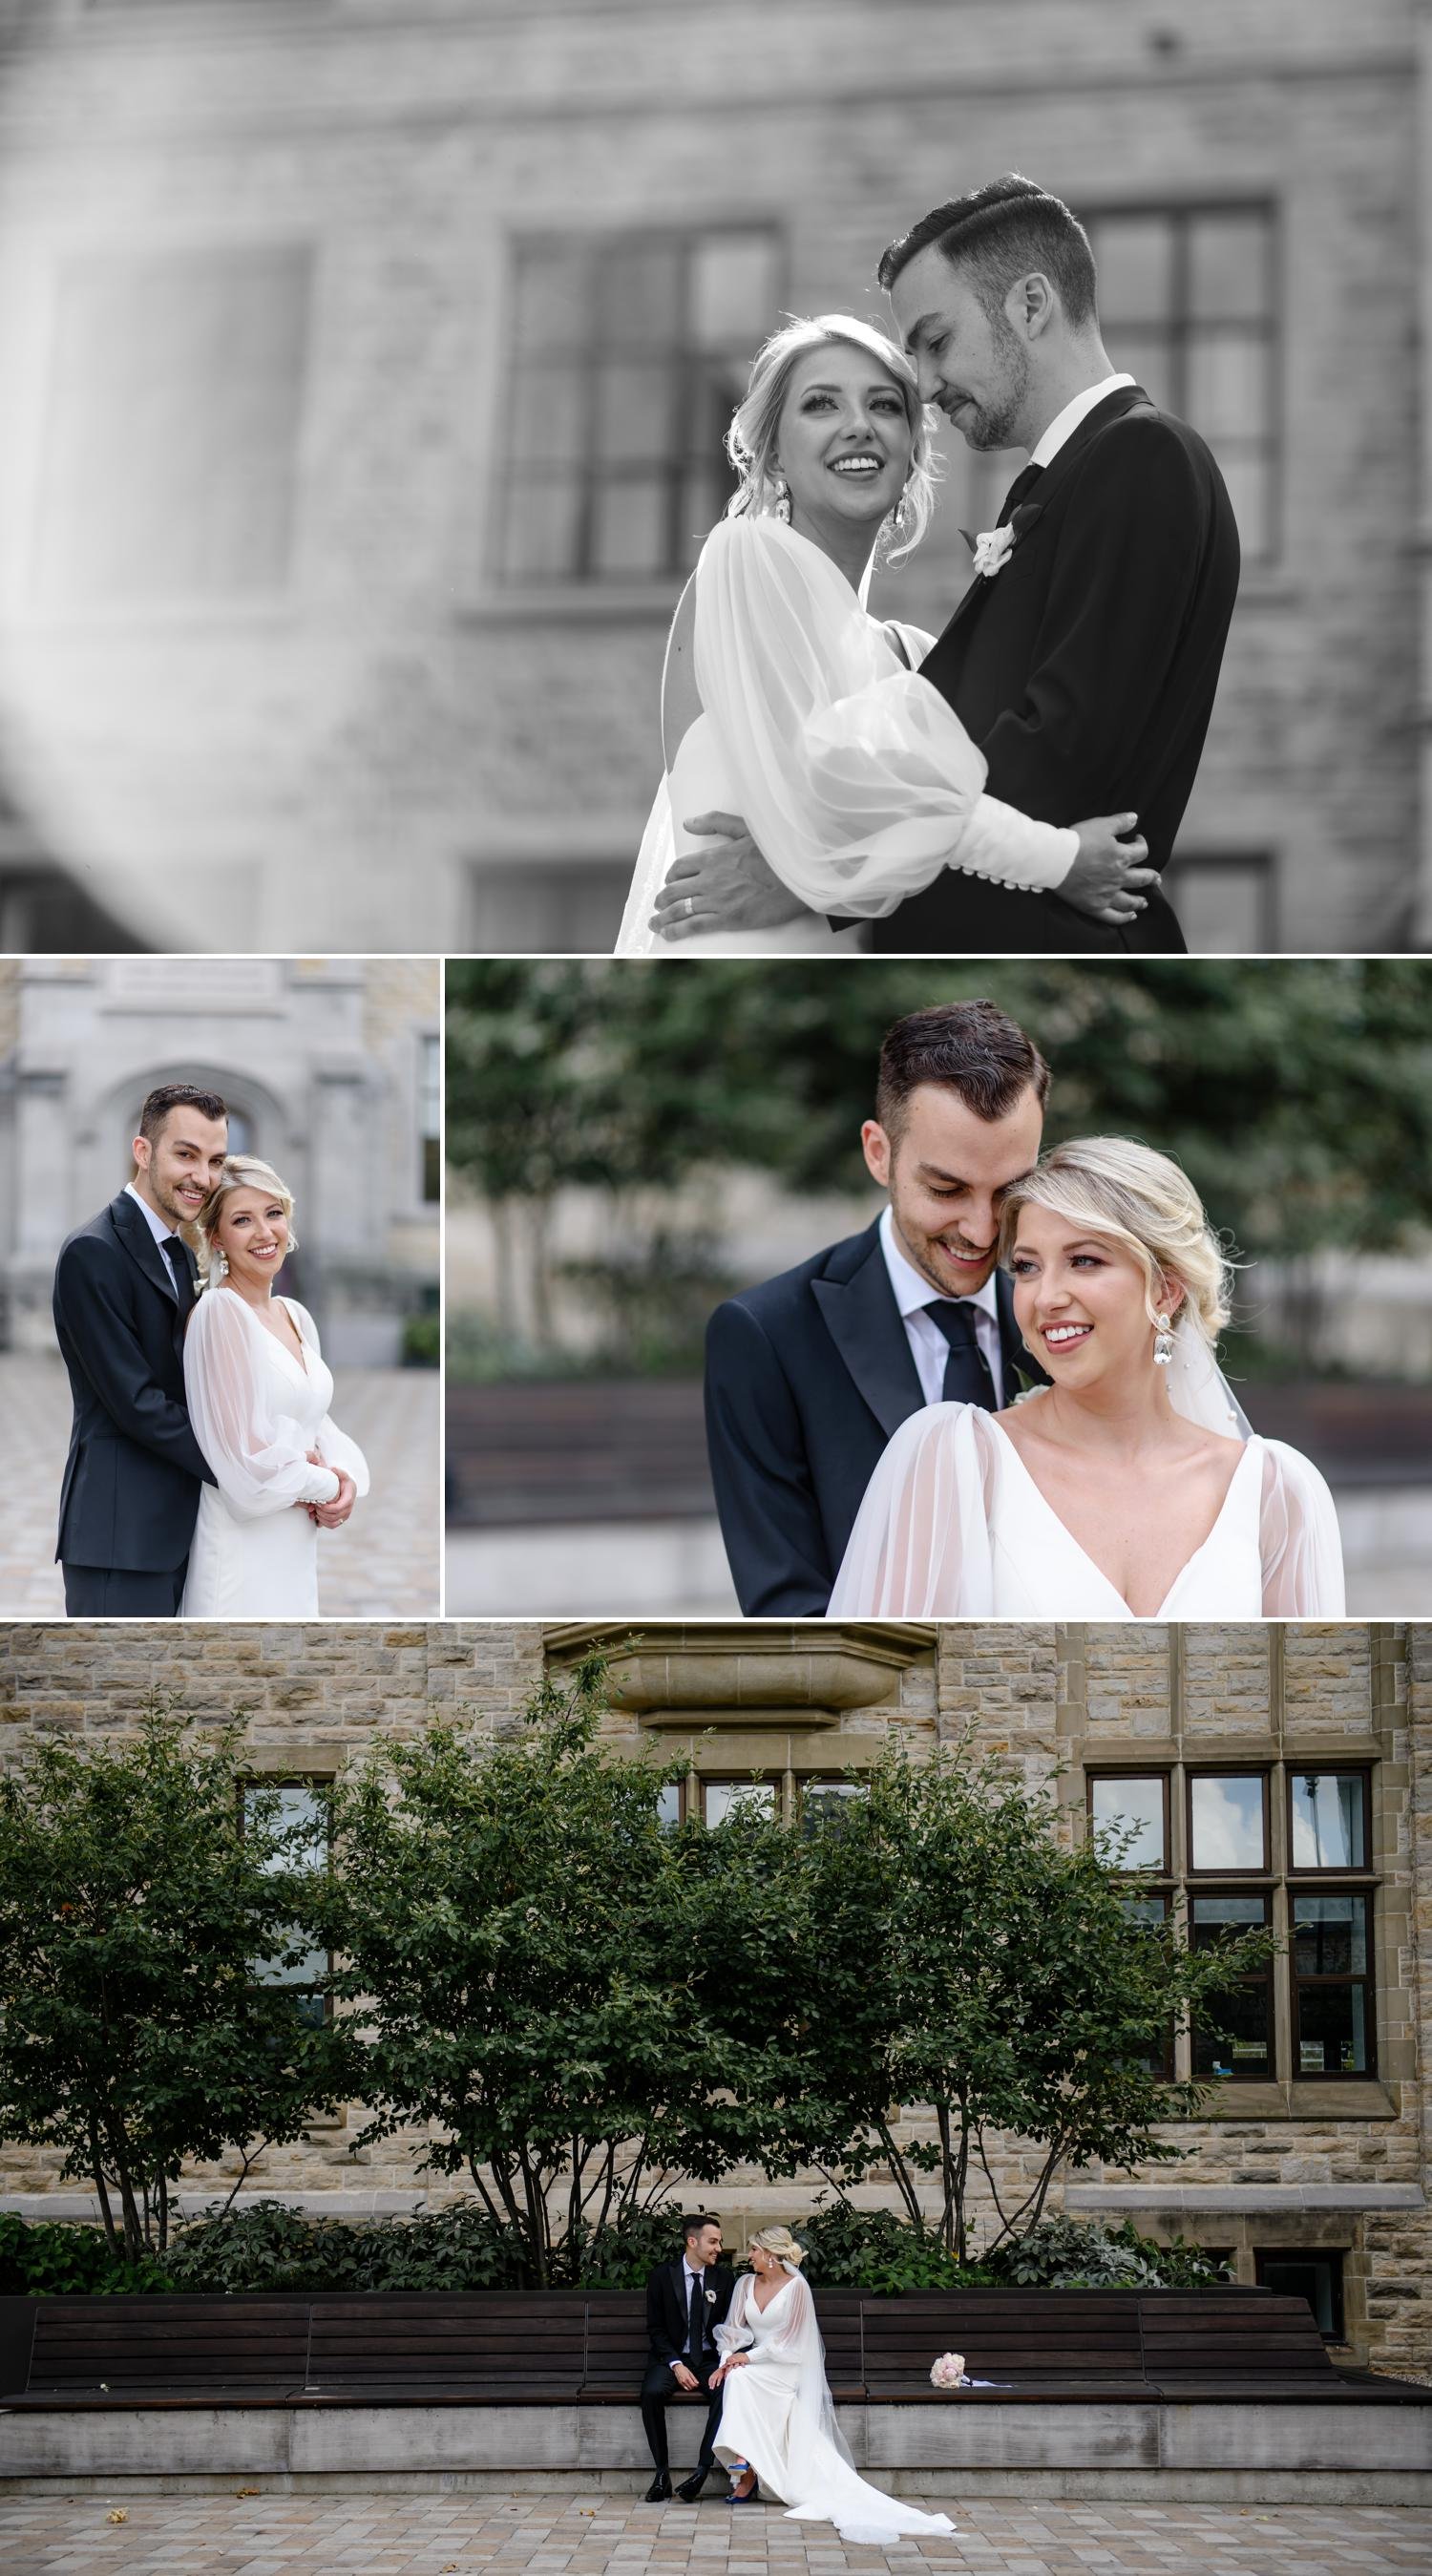 wedding photos of a bride and groom in ottawa